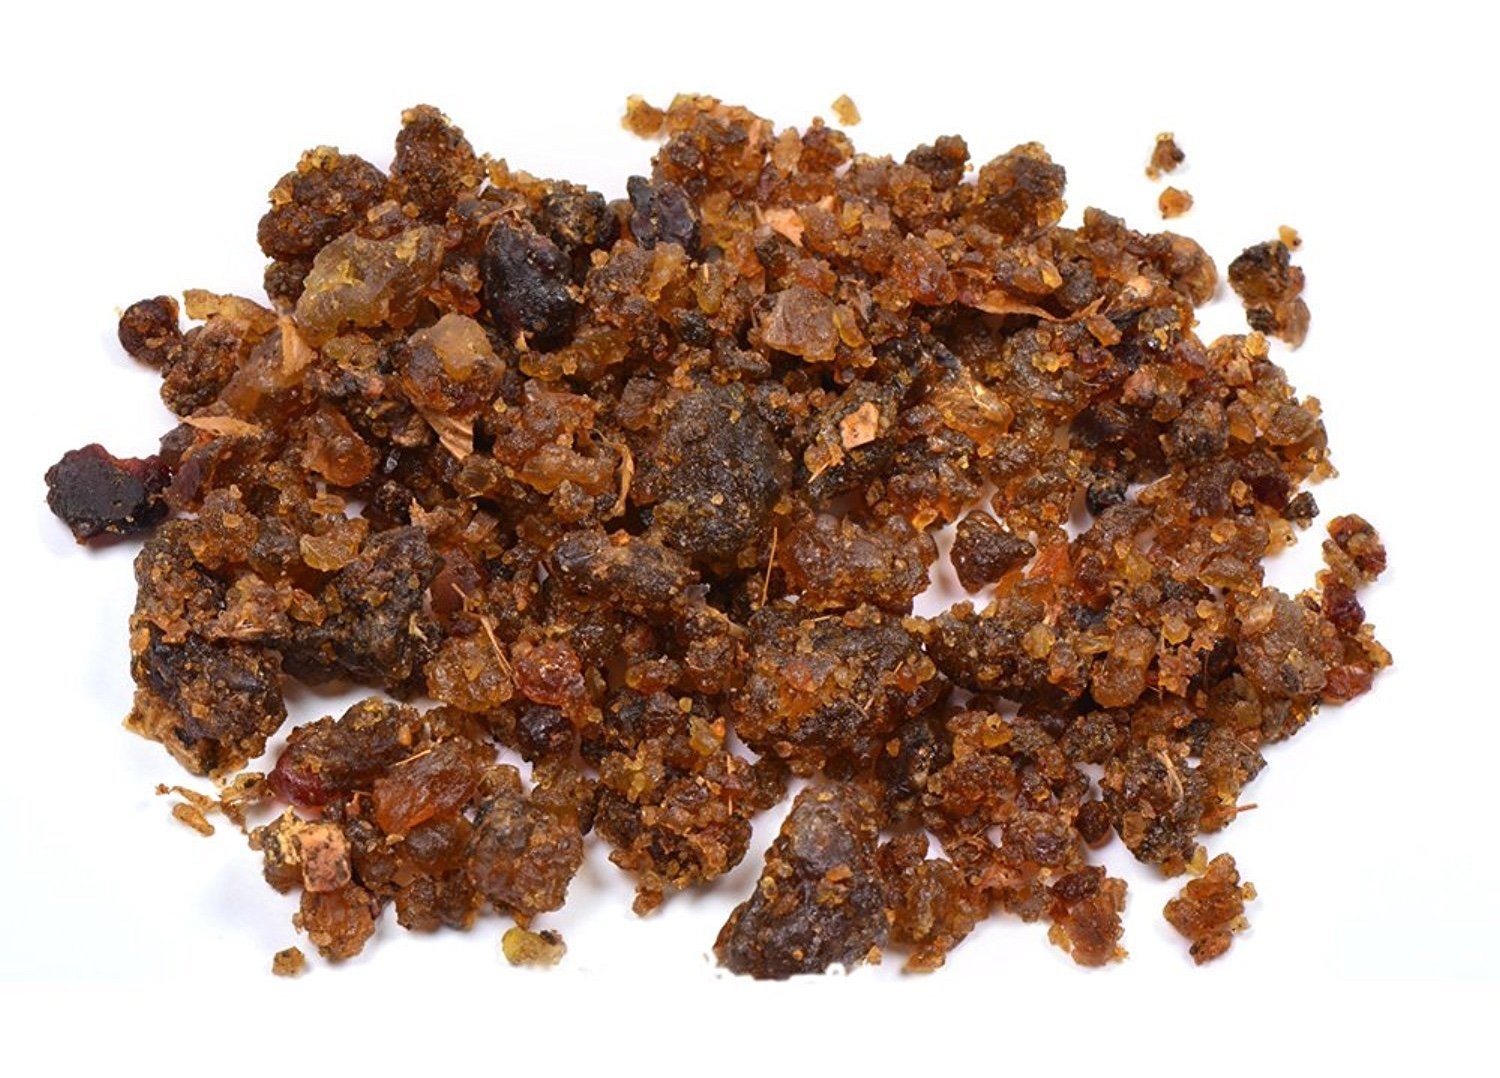 Organic Guggulu/ Guggul Powder - Commiphora Mukul - Guggulu is a unique Ayurvedic herb. Its oleo-gum resin substance is used in a variety of Ayurvedic and herbal medicines. Guggulu is traditionally used in Ayurvedic Medicine as Rasayana (Rejuvenative tonic) and as Balya (improves strength).